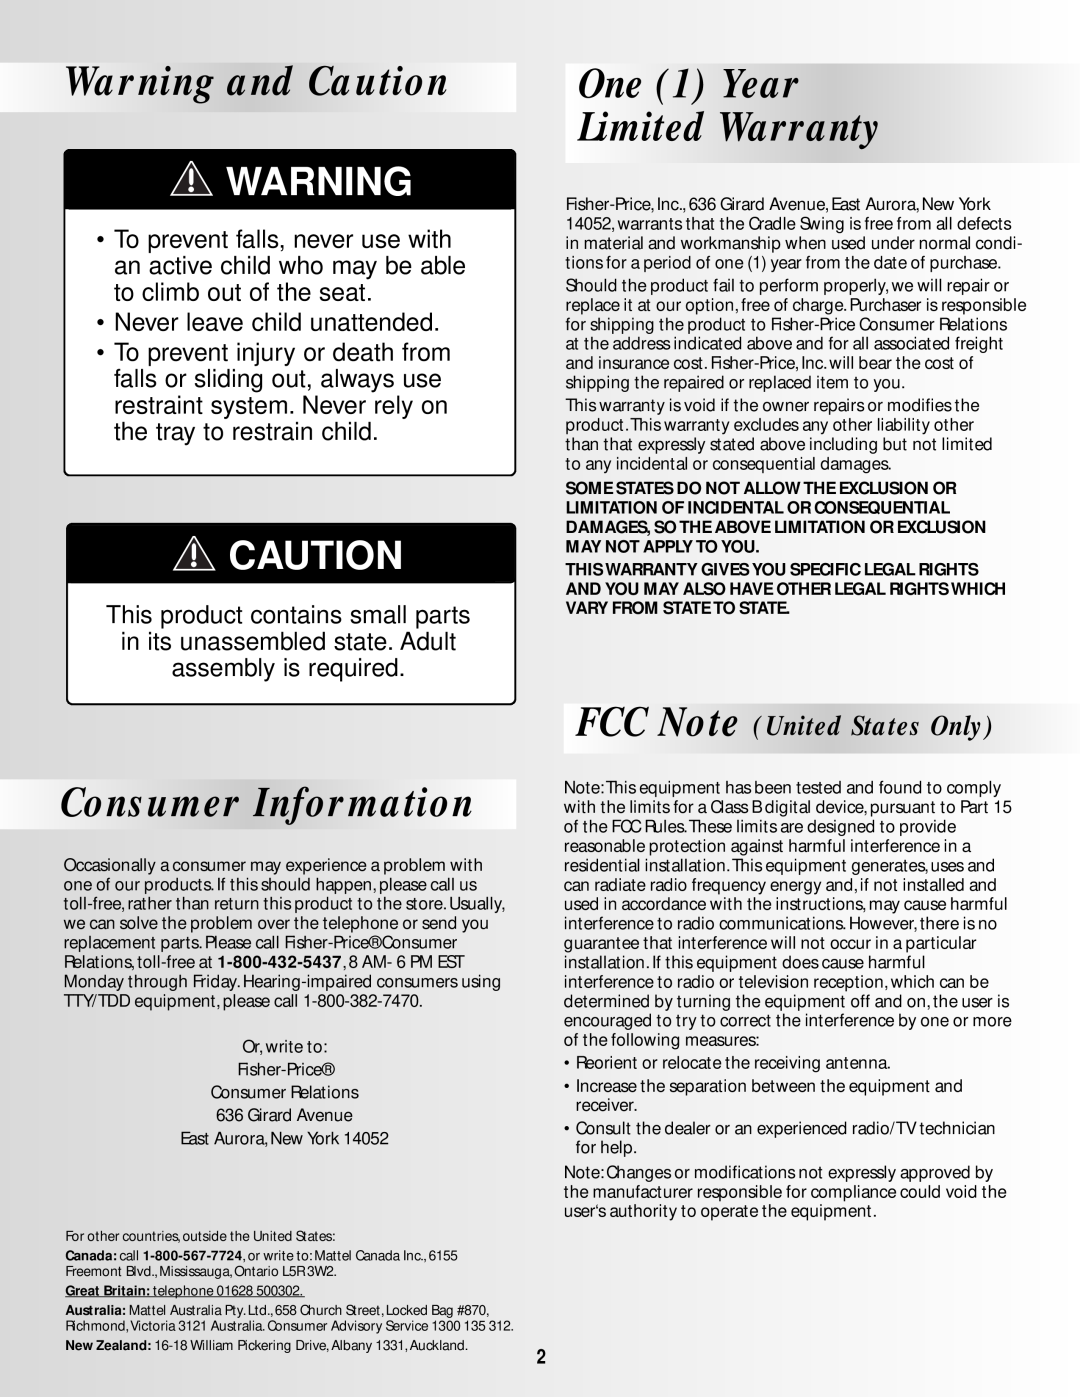 Fisher-Price BO639 Warning and Caution, One 1 Year Limited Warranty, ConsumerInformation, FCC Note United States Only 